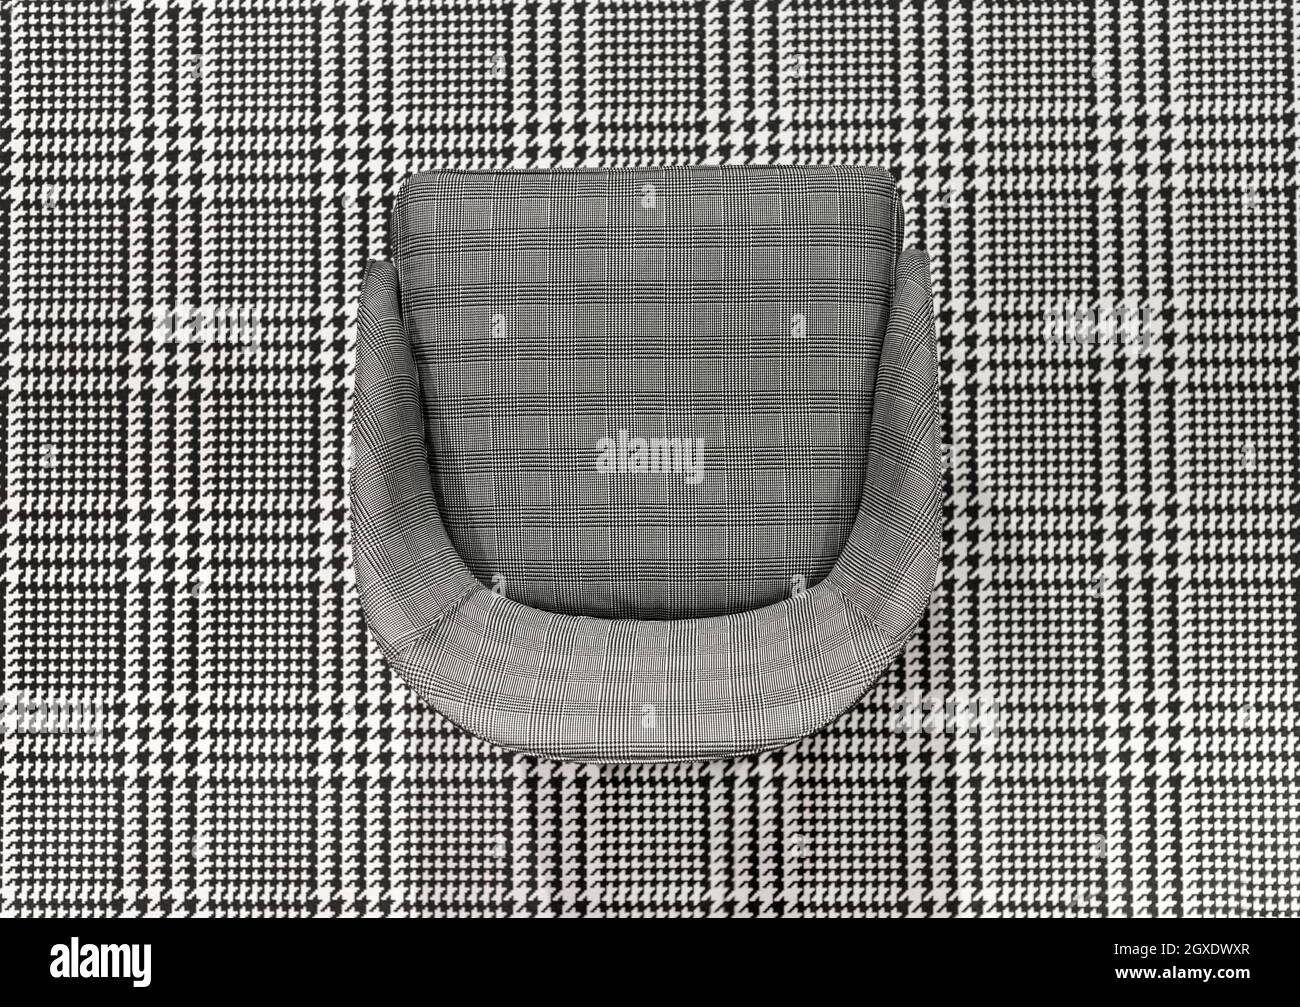 Upholstered checked pattern chair juxtaposed on matching black and white woven plaid textile in a top down view for high contrast effect for design Stock Photo